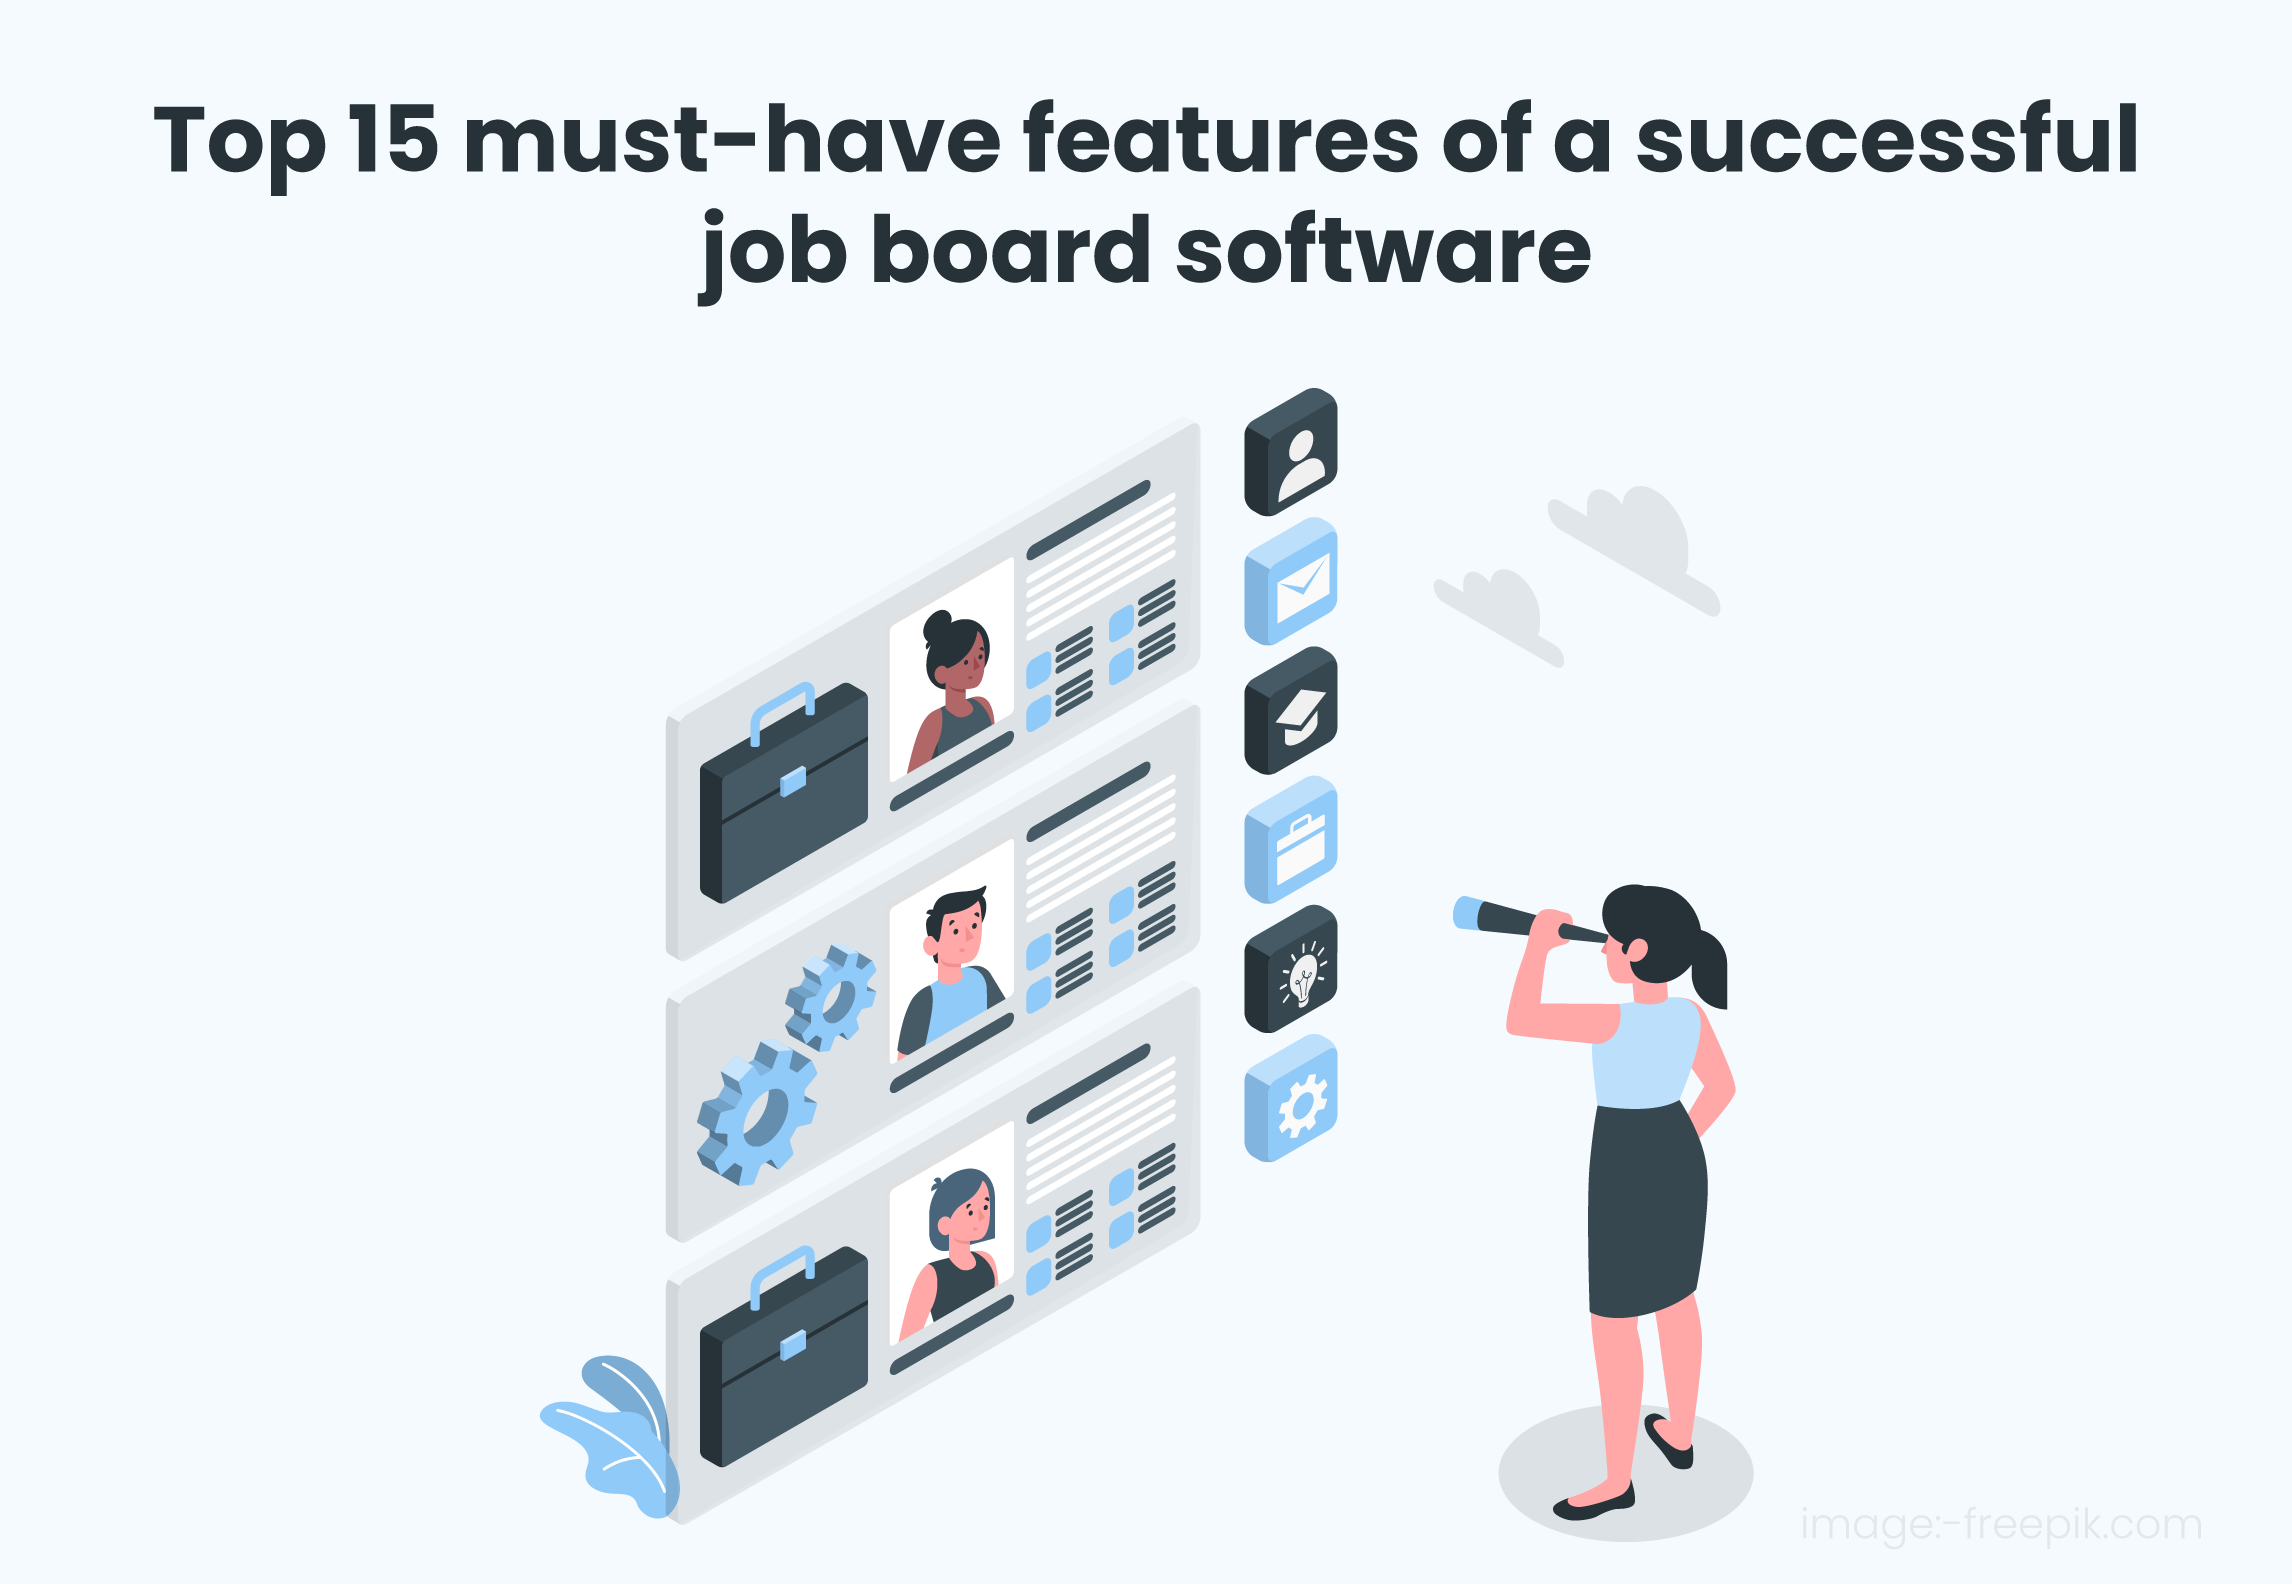 Top 15 must have features of a successful job board software - Knovator